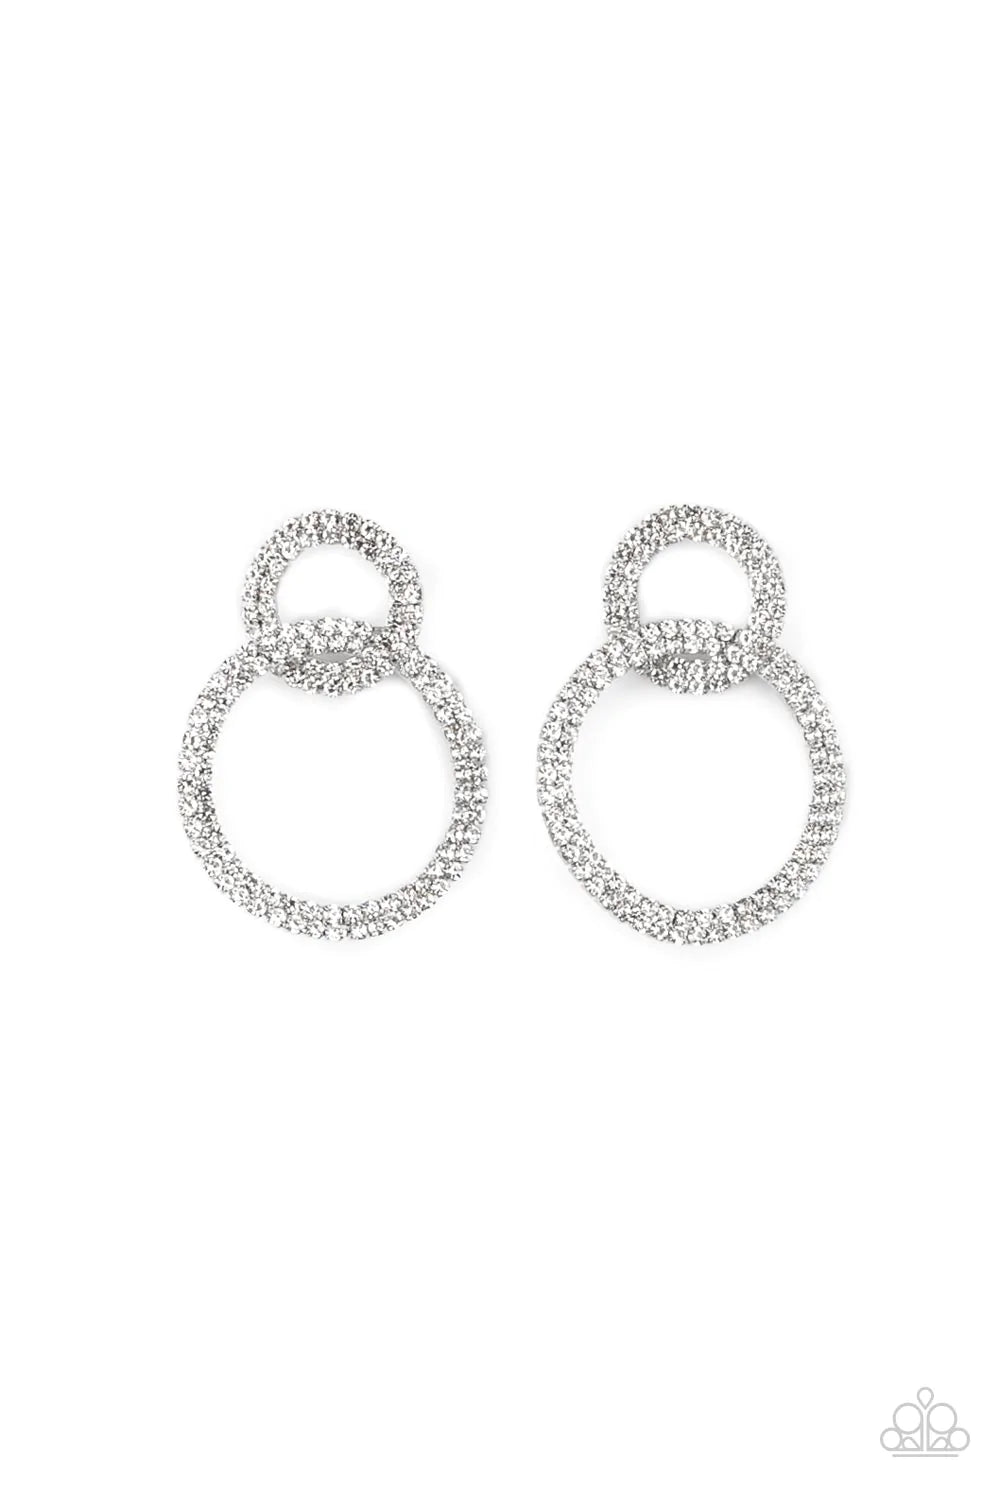 Intensely Icy - White Post Earrings